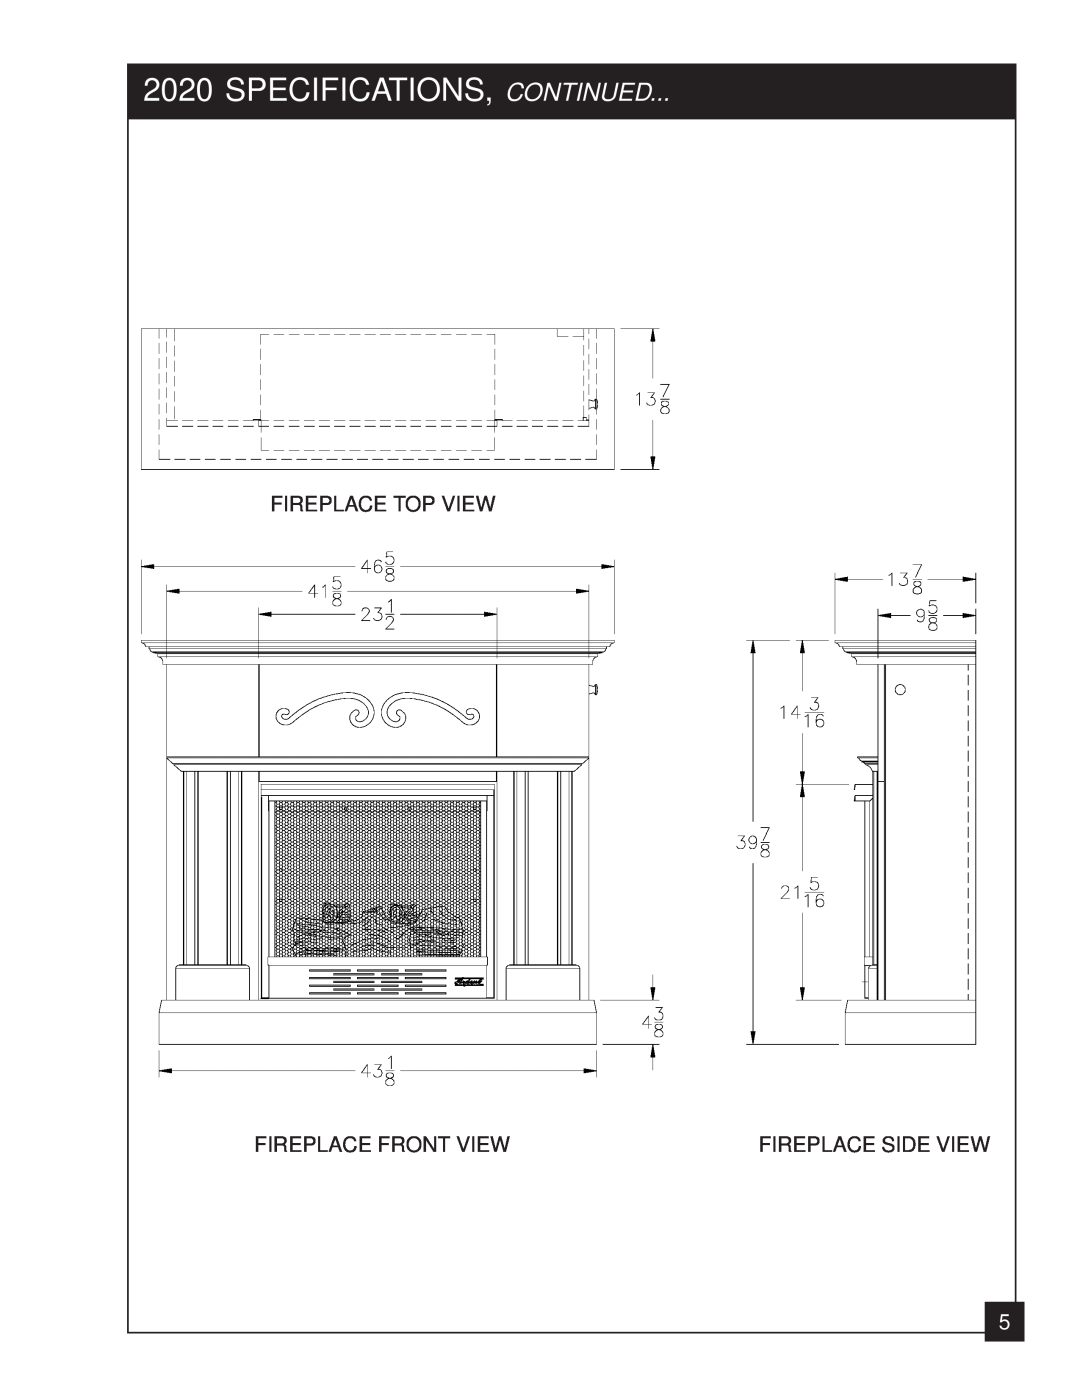 United States Stove 2020L Specifications, Continued, Fireplace Top View, Fireplace Front View, Fireplace Side View 